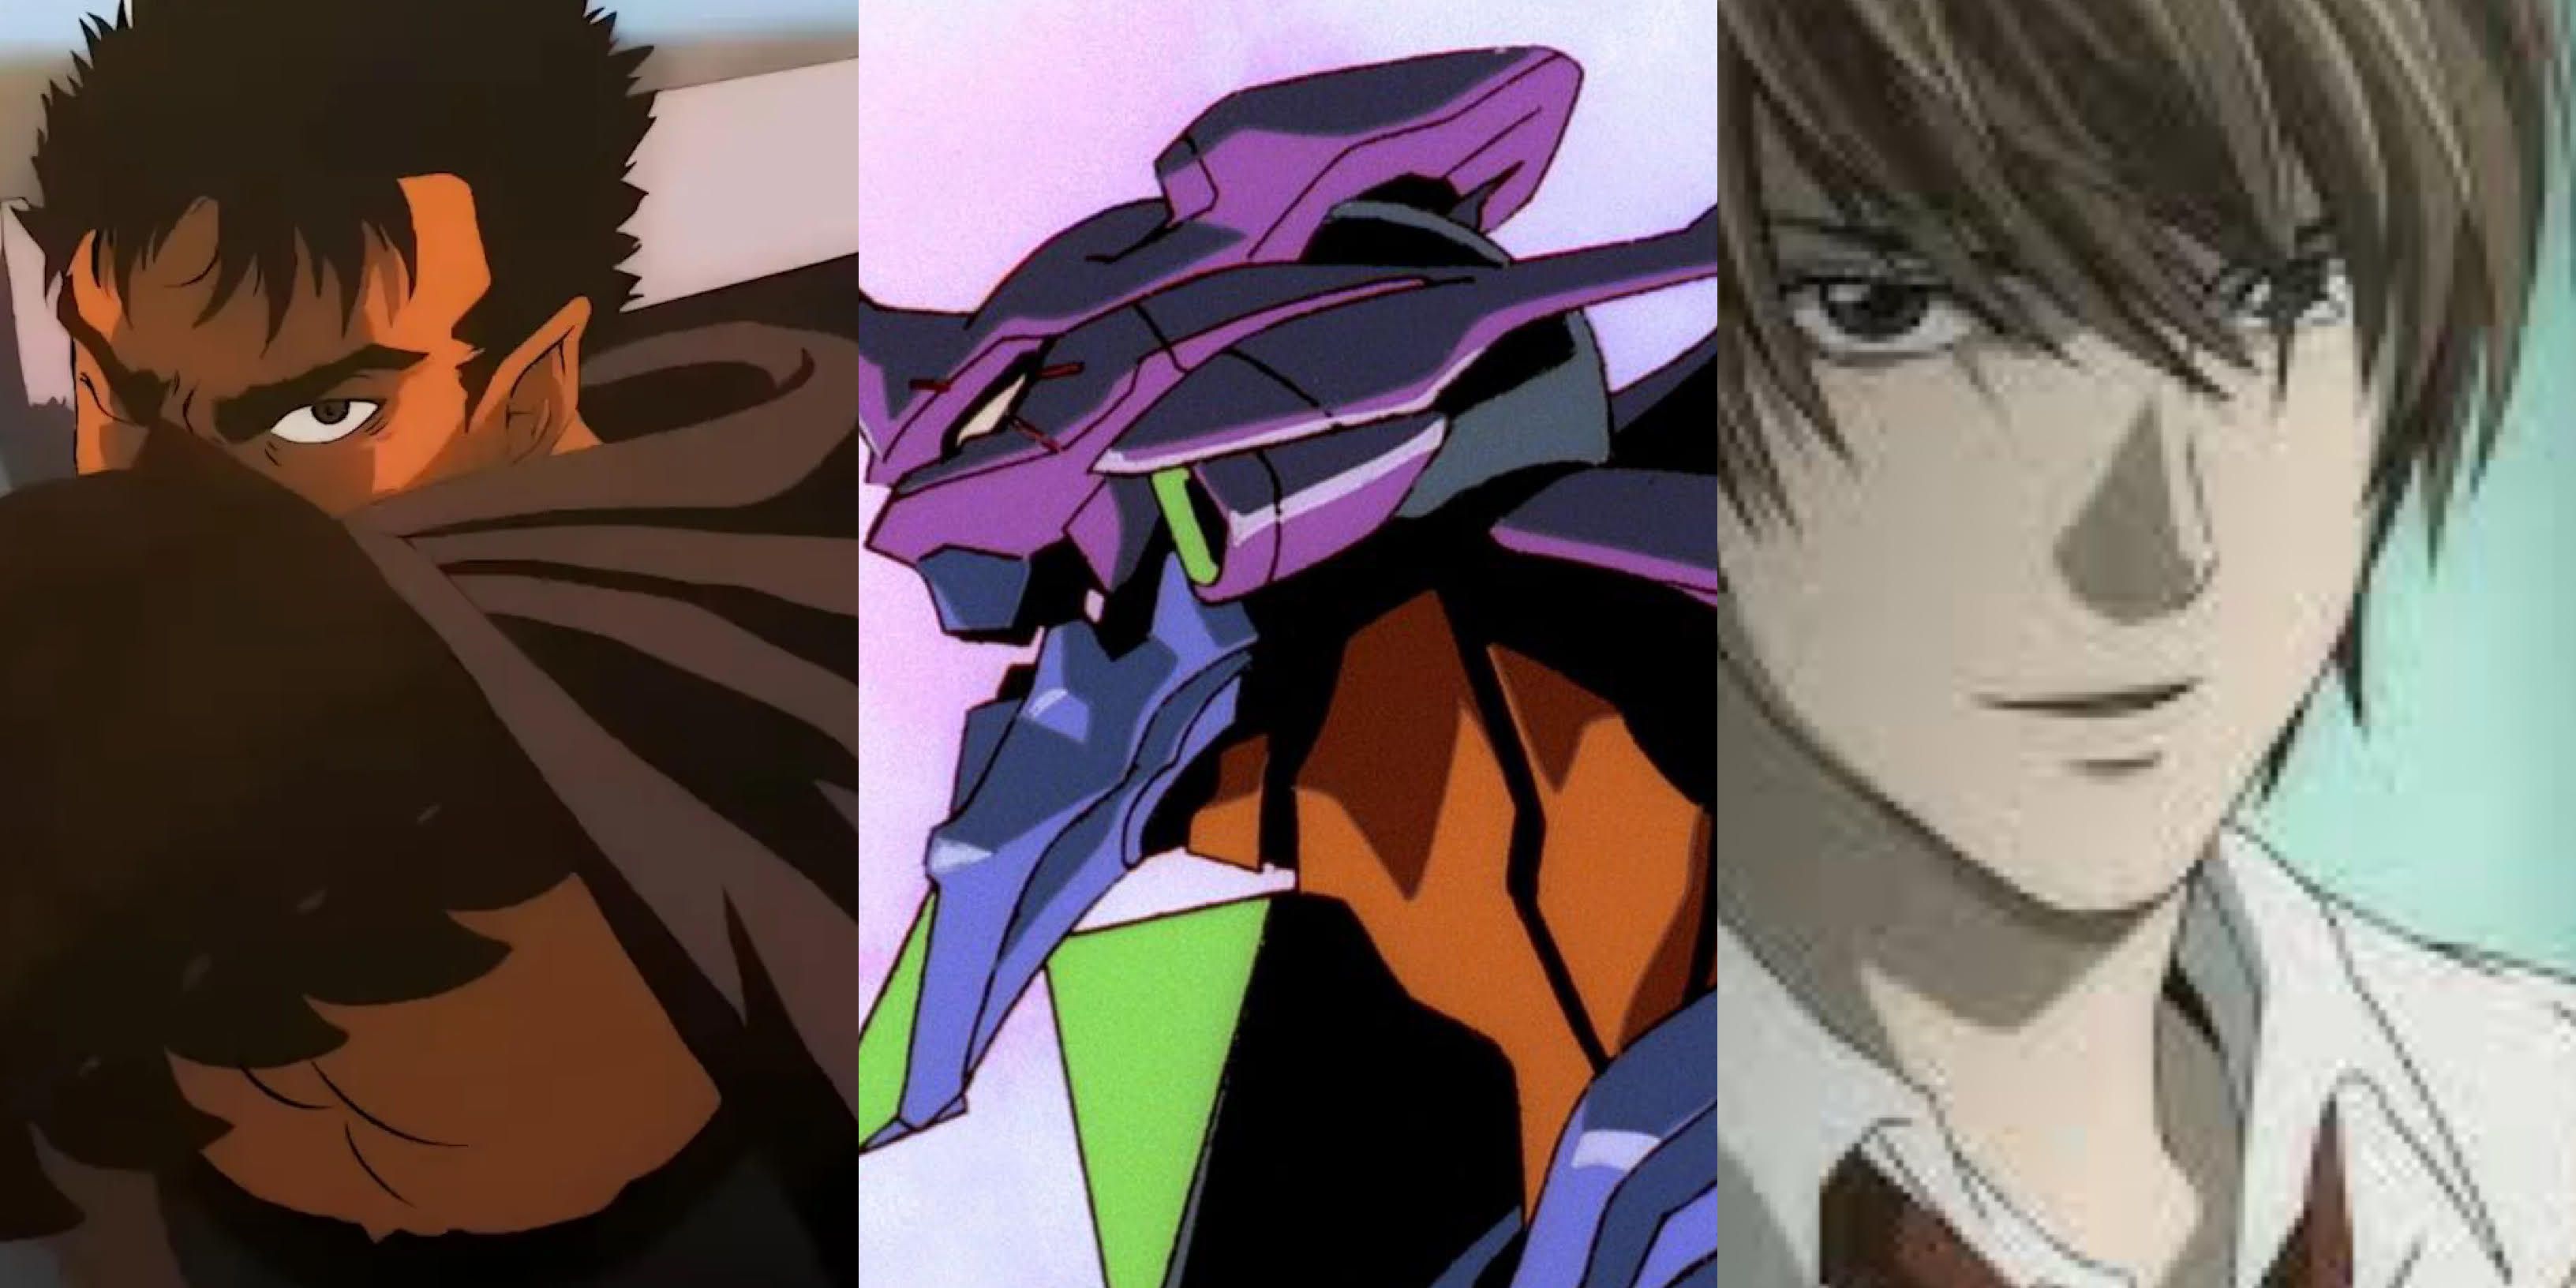 Nihilistic Anime: Berserk (left), Neon Genesis Evangelion (middle), and Death Note (right)